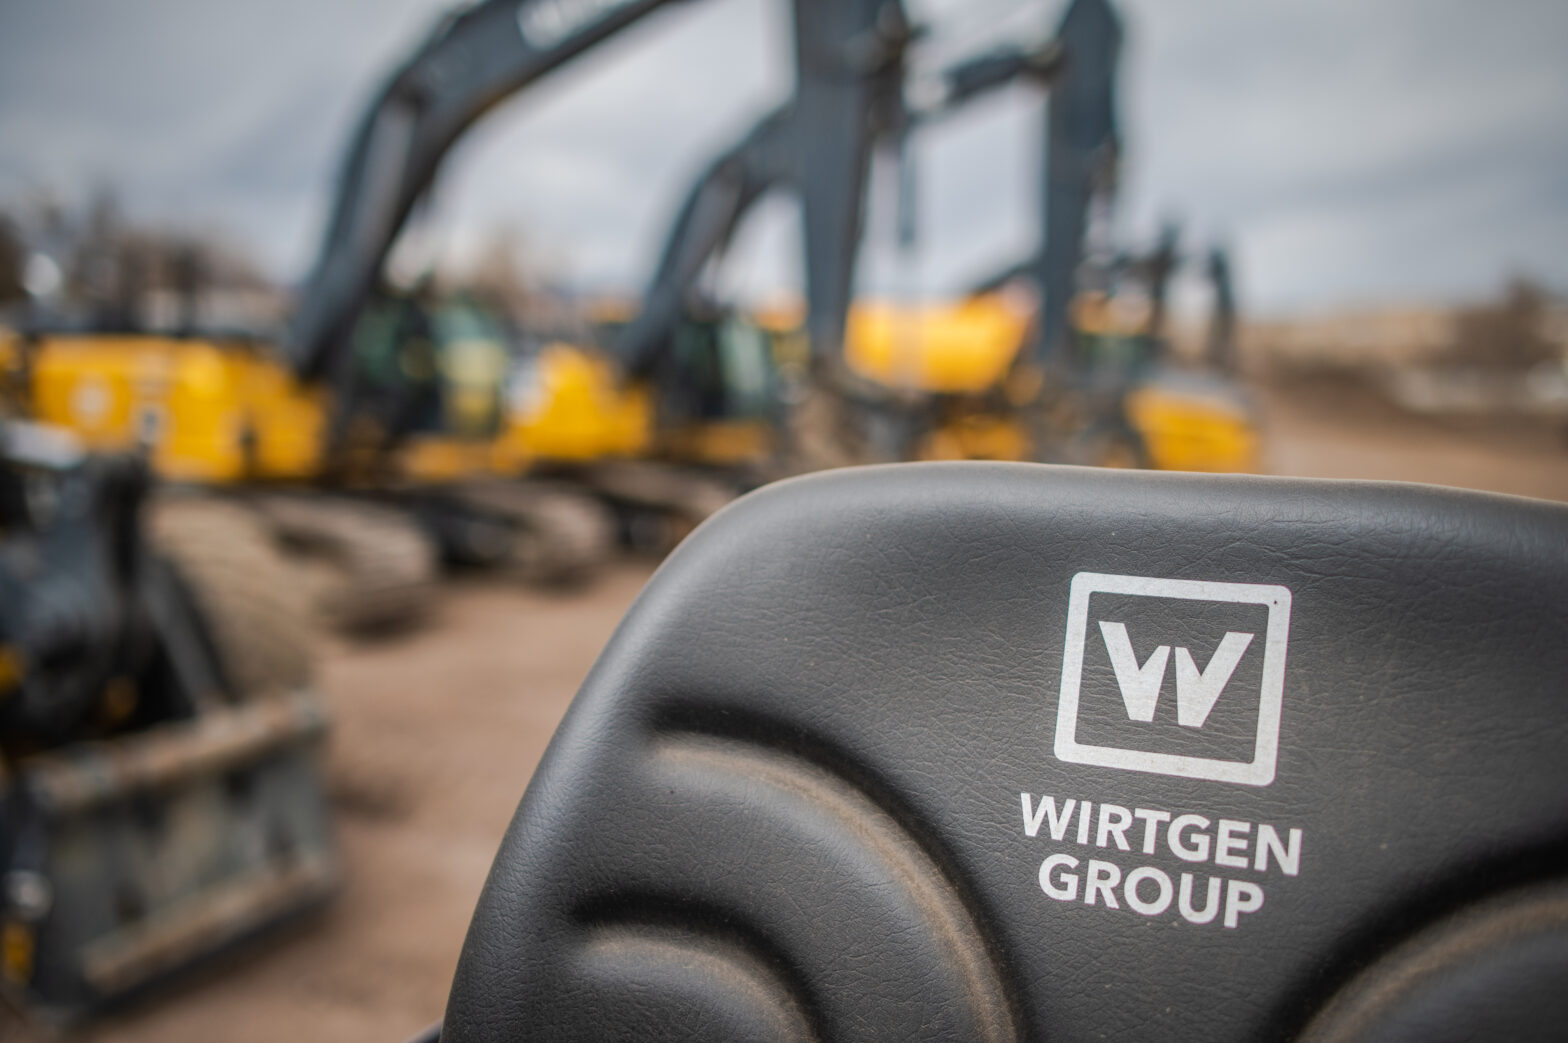 Get Your Wirtgen Group Equipment Season-Ready with the Machine Inspection and Rebuild Program